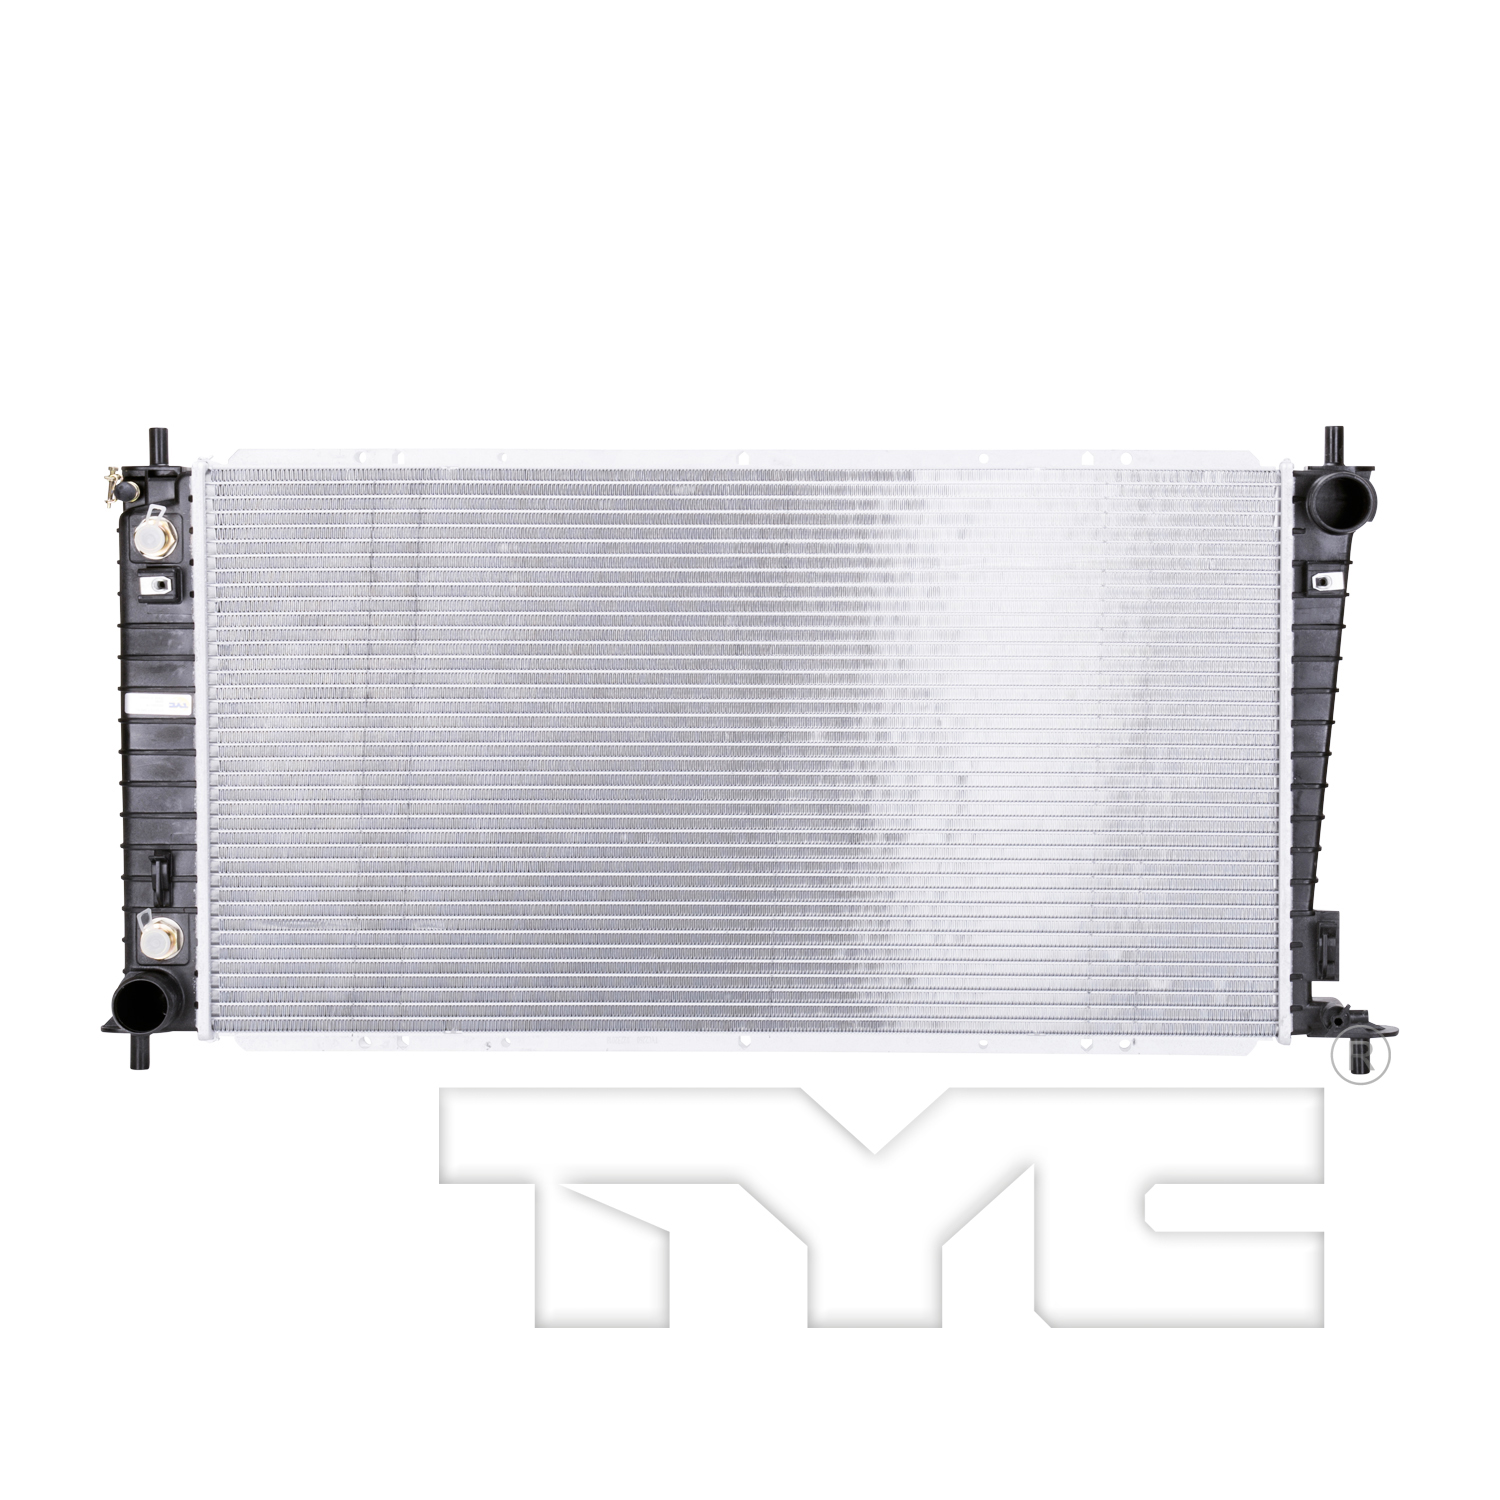 Aftermarket RADIATORS for FORD - F-150, F-150,99-02,Radiator assembly